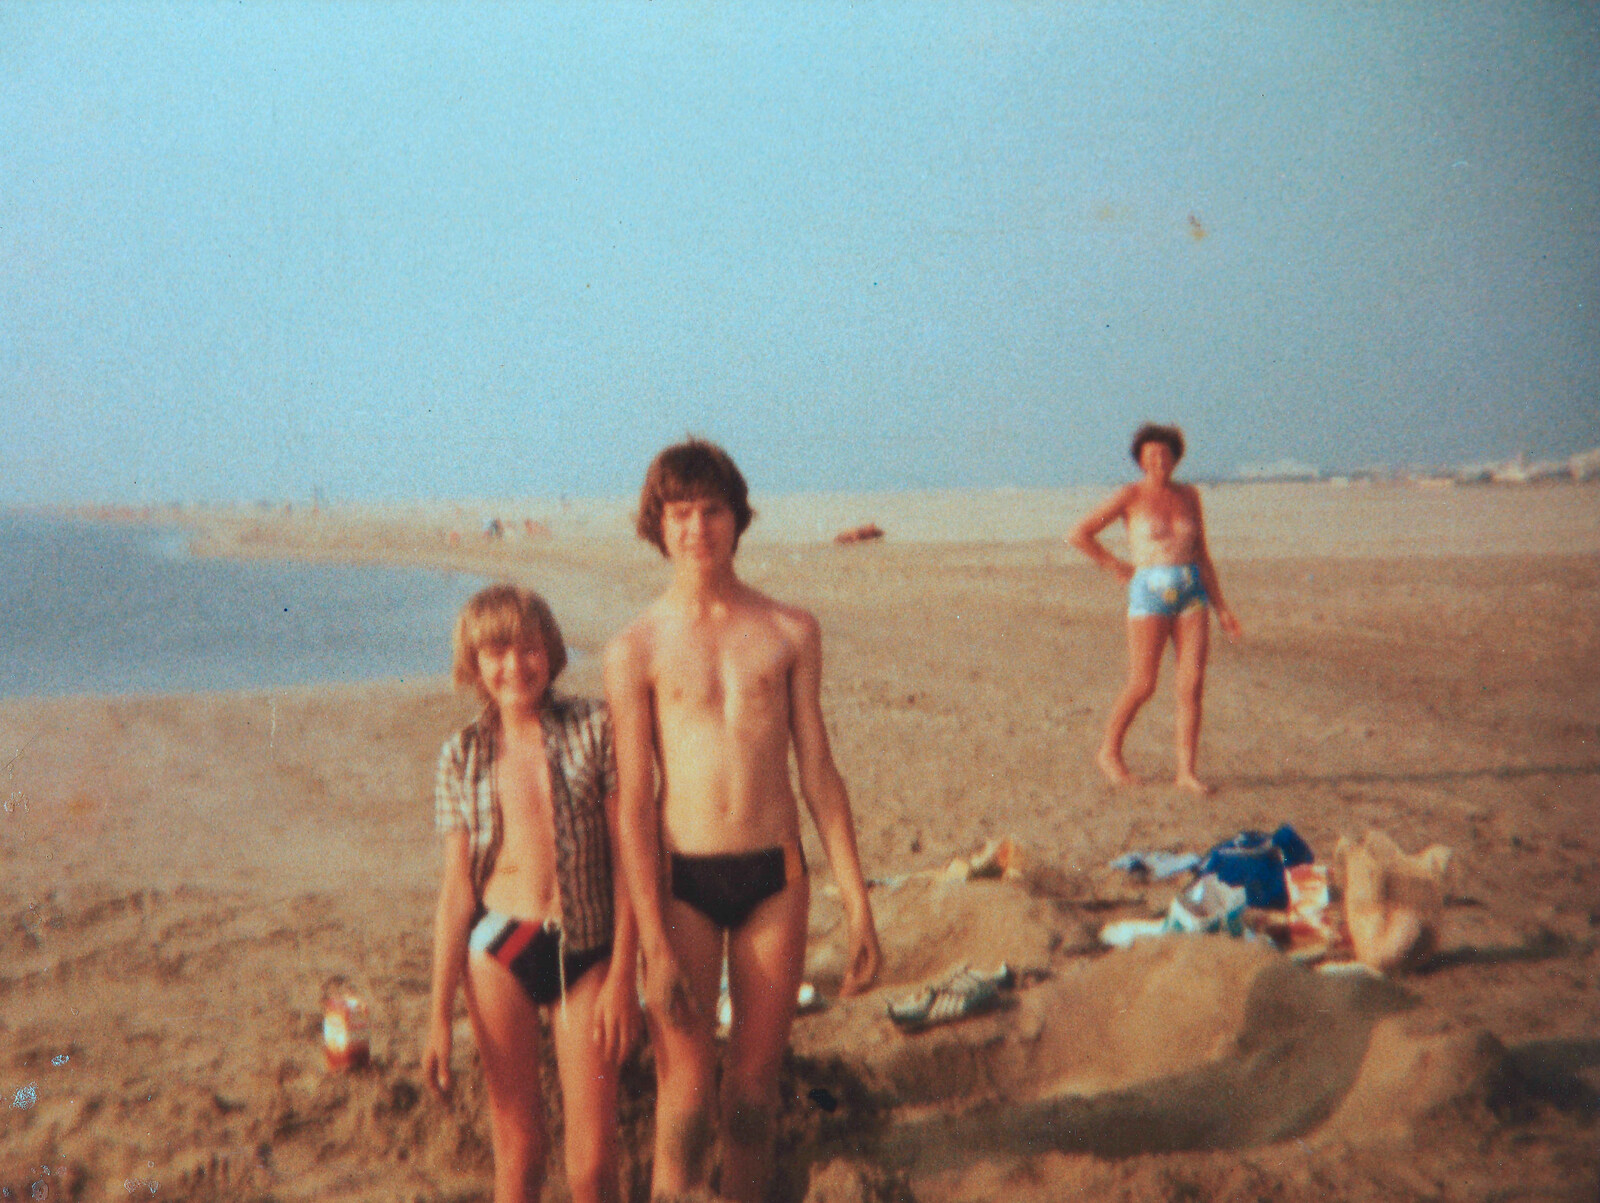 Nosher and Sean in a hole on the beach from Camping with Sean, The Camargue, South of France, 15th July 1982